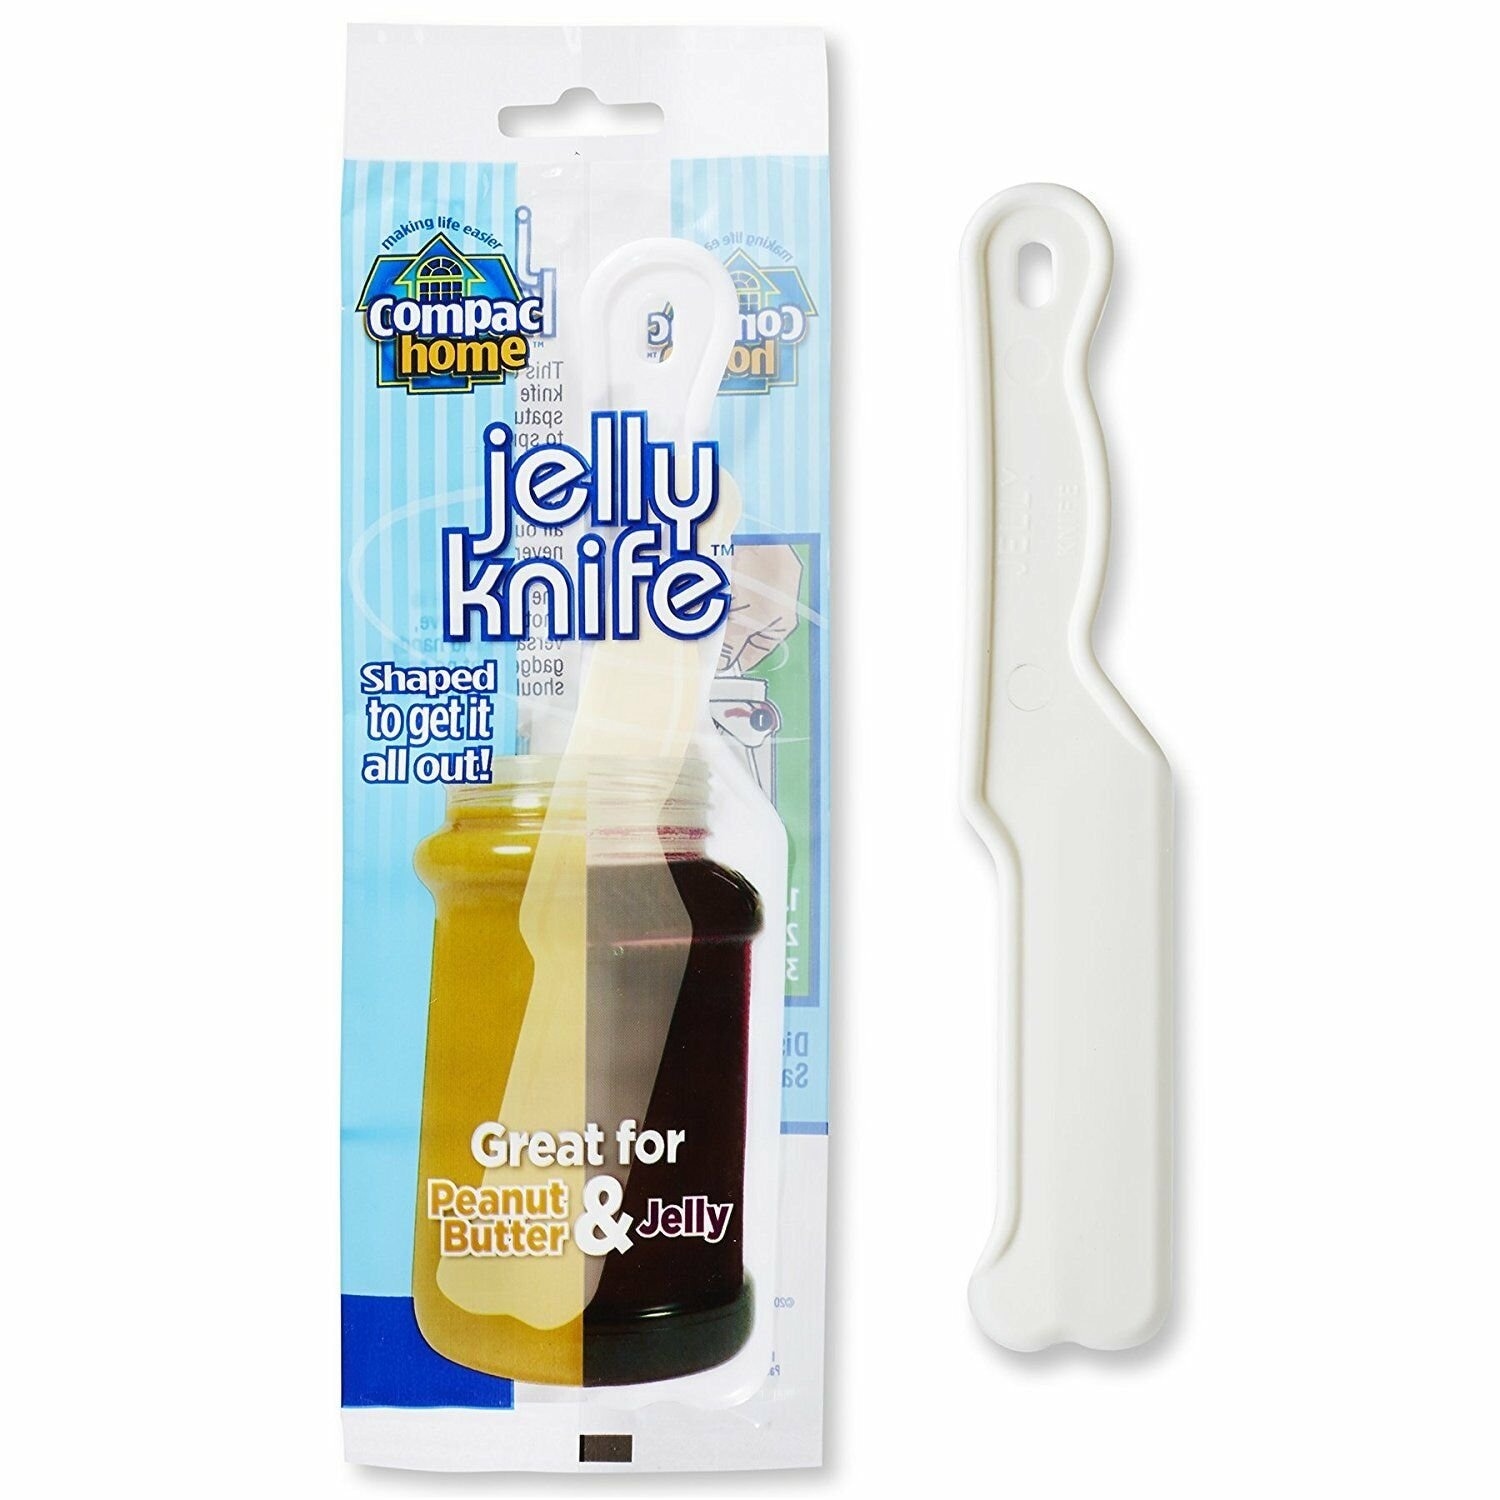 https://ak1.ostkcdn.com/images/products/is/images/direct/a792582f5b133338e7b6f1f157e261f930377996/Compac-Jelly-Jar-Spreader-Spatula-Knife-for-Peanut-Butter-and-Jelly.jpg